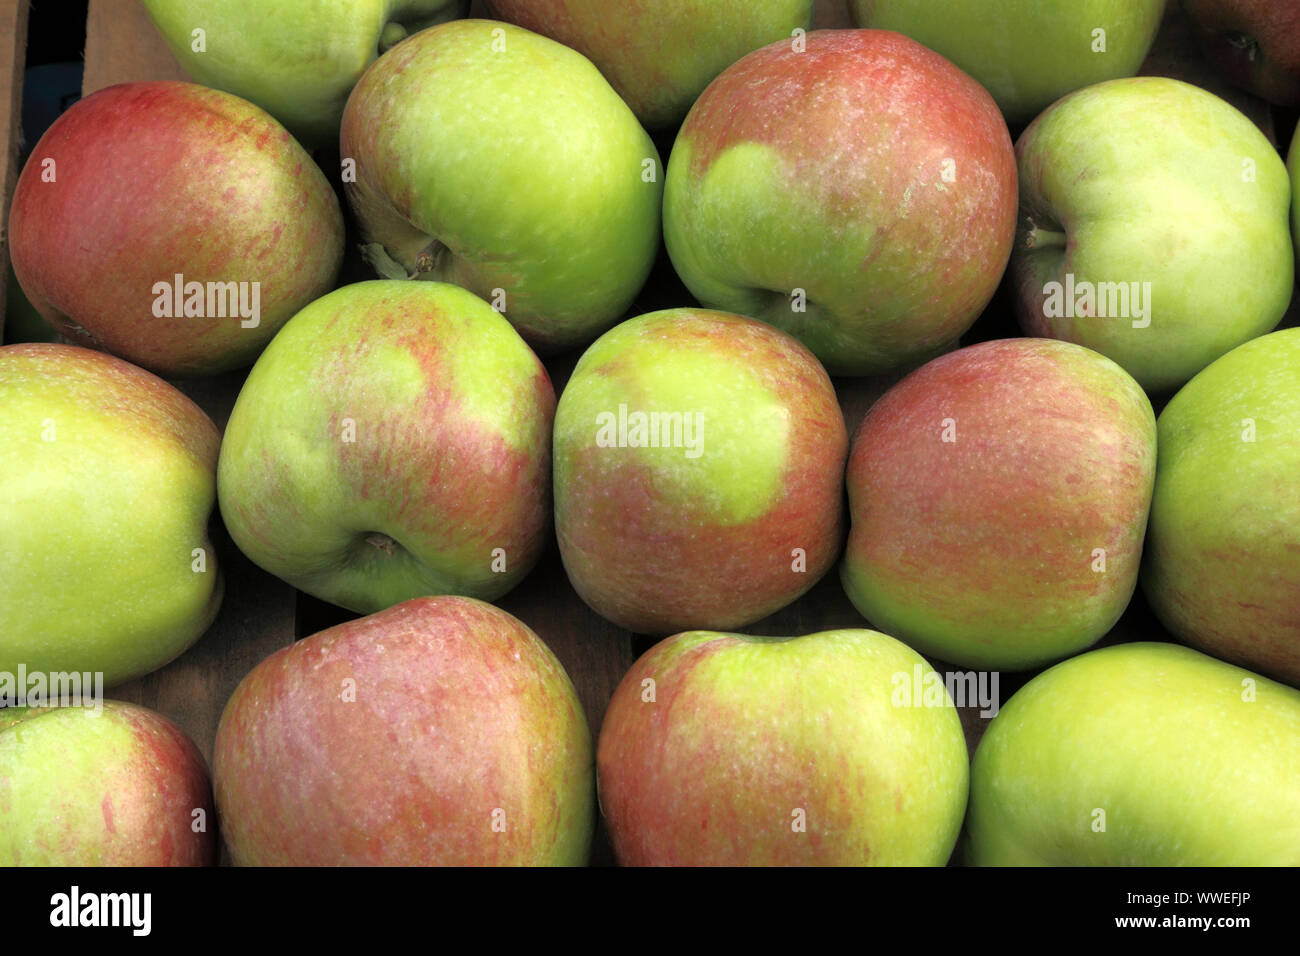 Apple 'Howgate Wonder', apples, cooking apples, apple, Malus Domestica Stock Photo